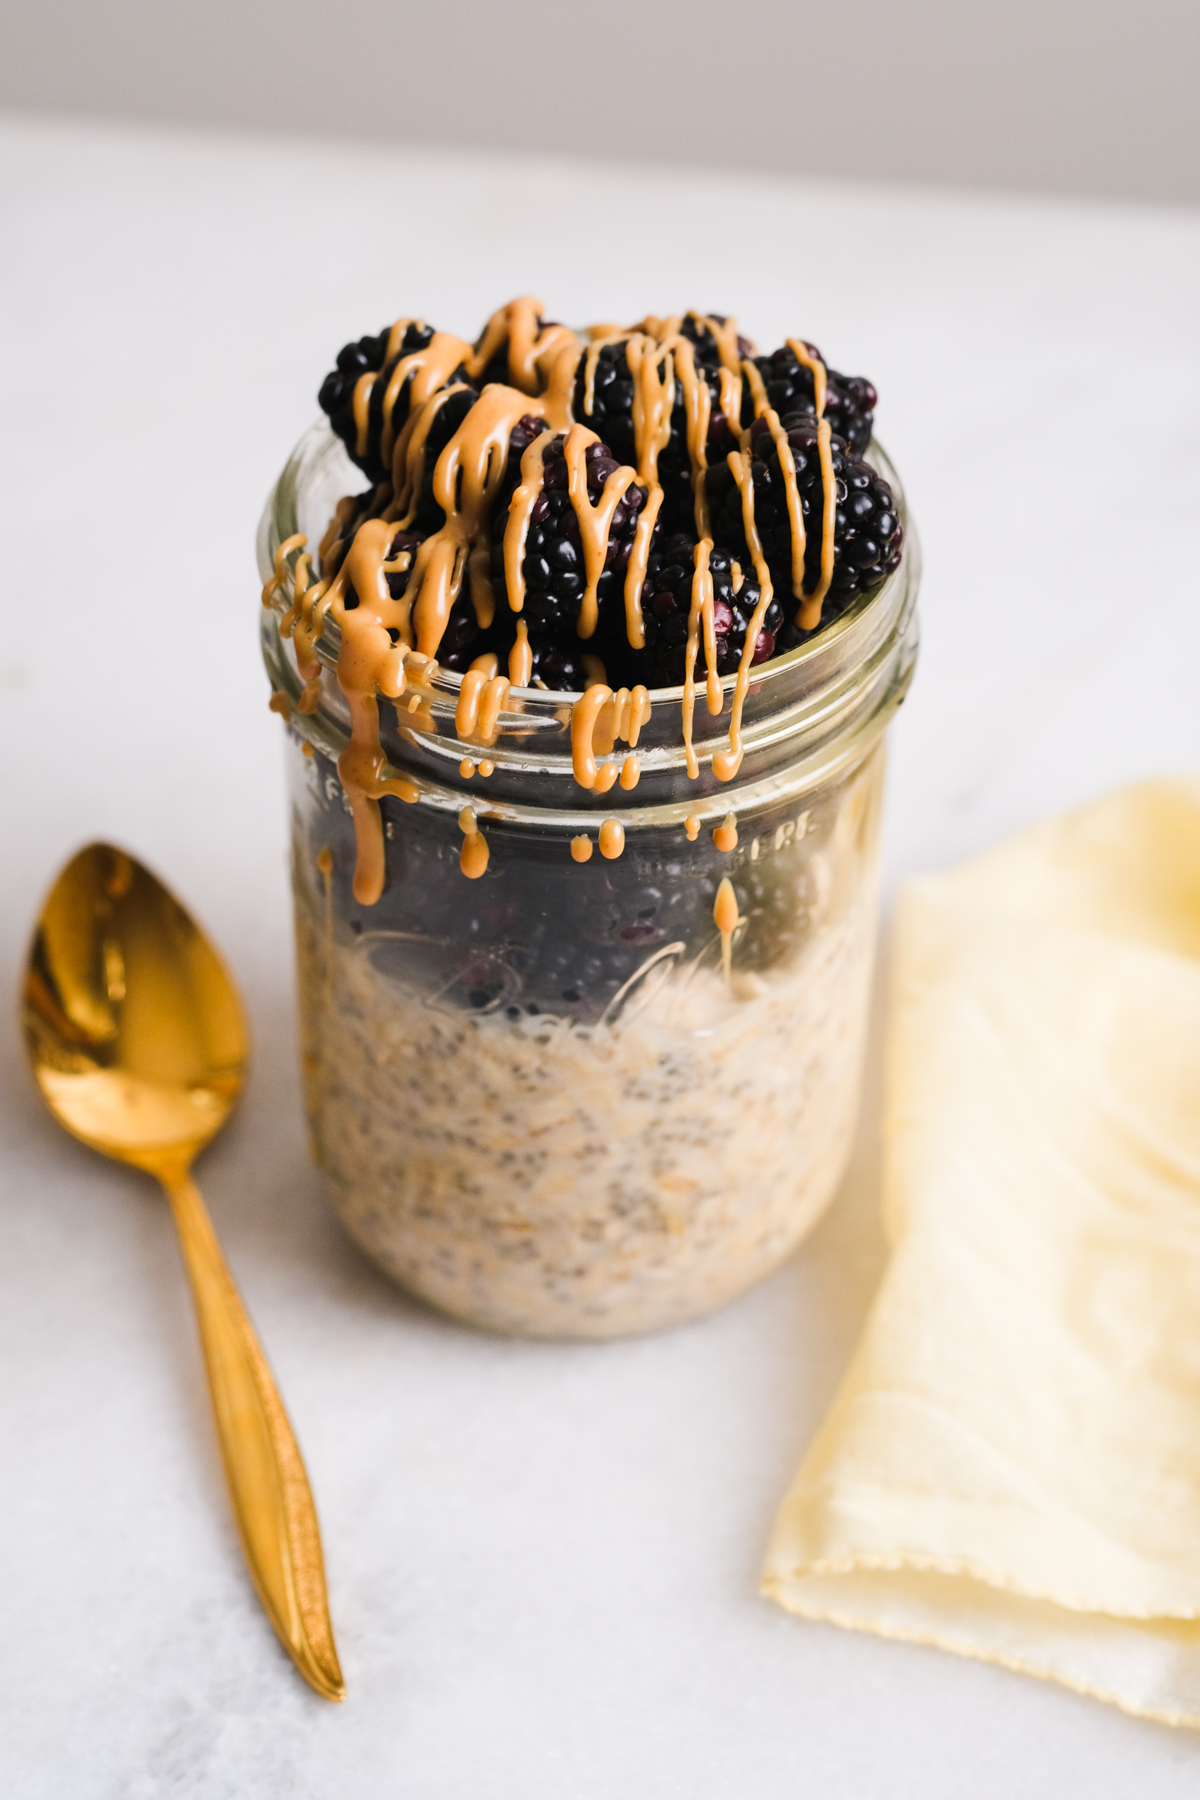 peanut butter overnight oats with chia seeds and blackberries